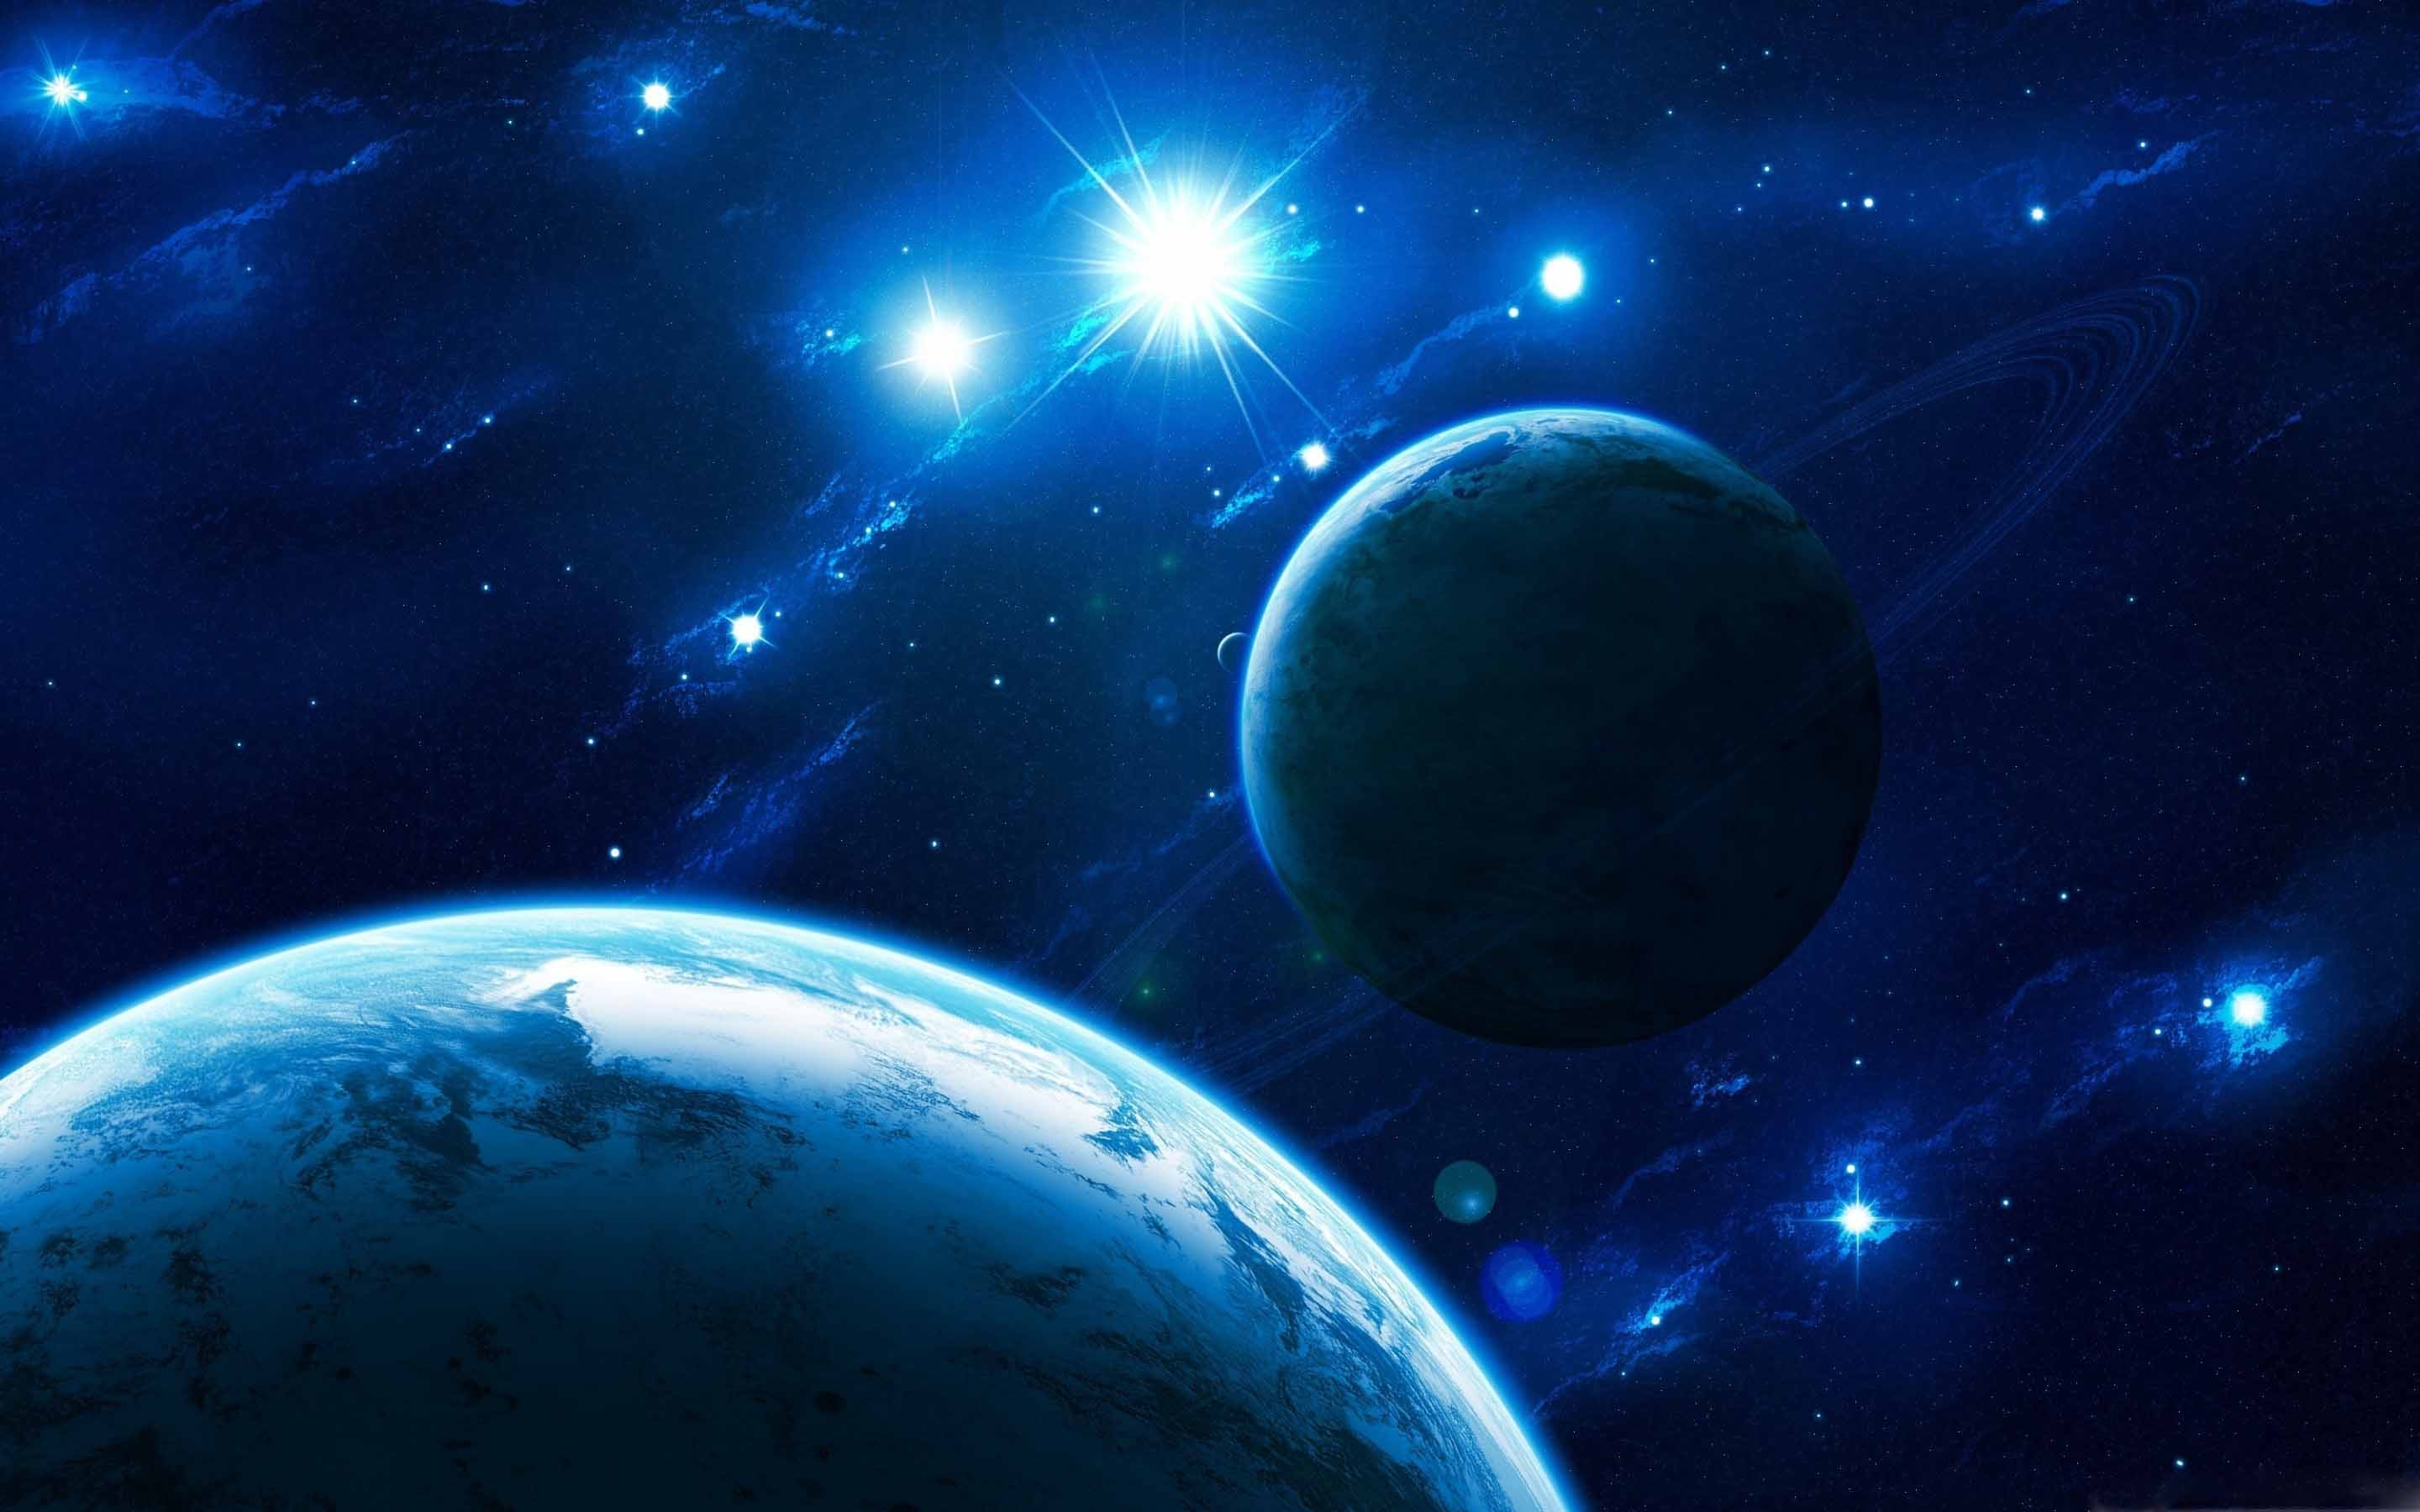 star wallpaper download,outer space,astronomical object,universe,planet,atmosphere